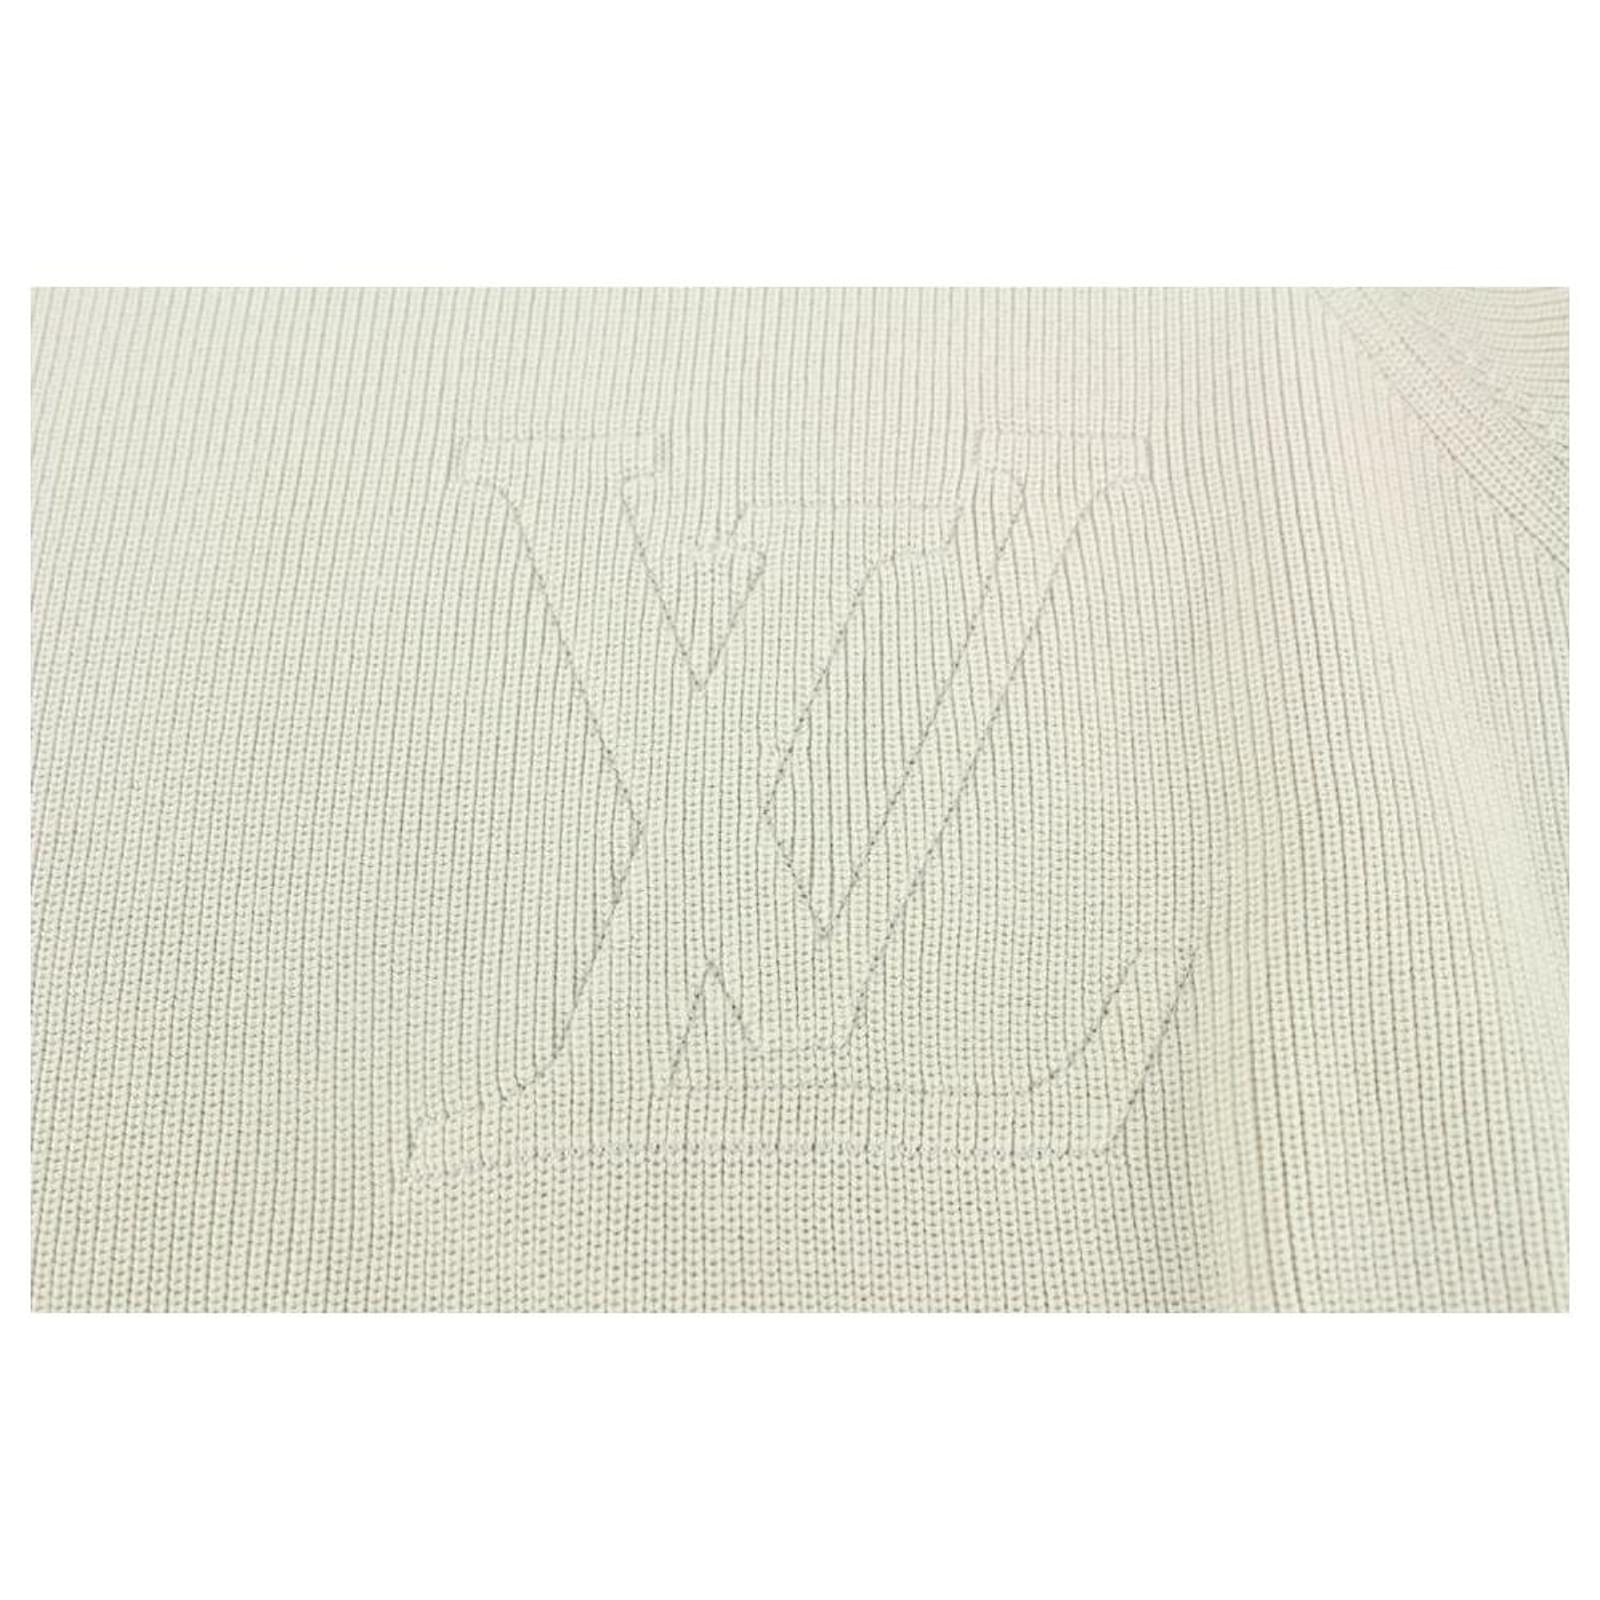 Louis Vuitton Men XL Cream Cable Knit Jumbo LV Logo Initial Sweater Pull Over 121lv4